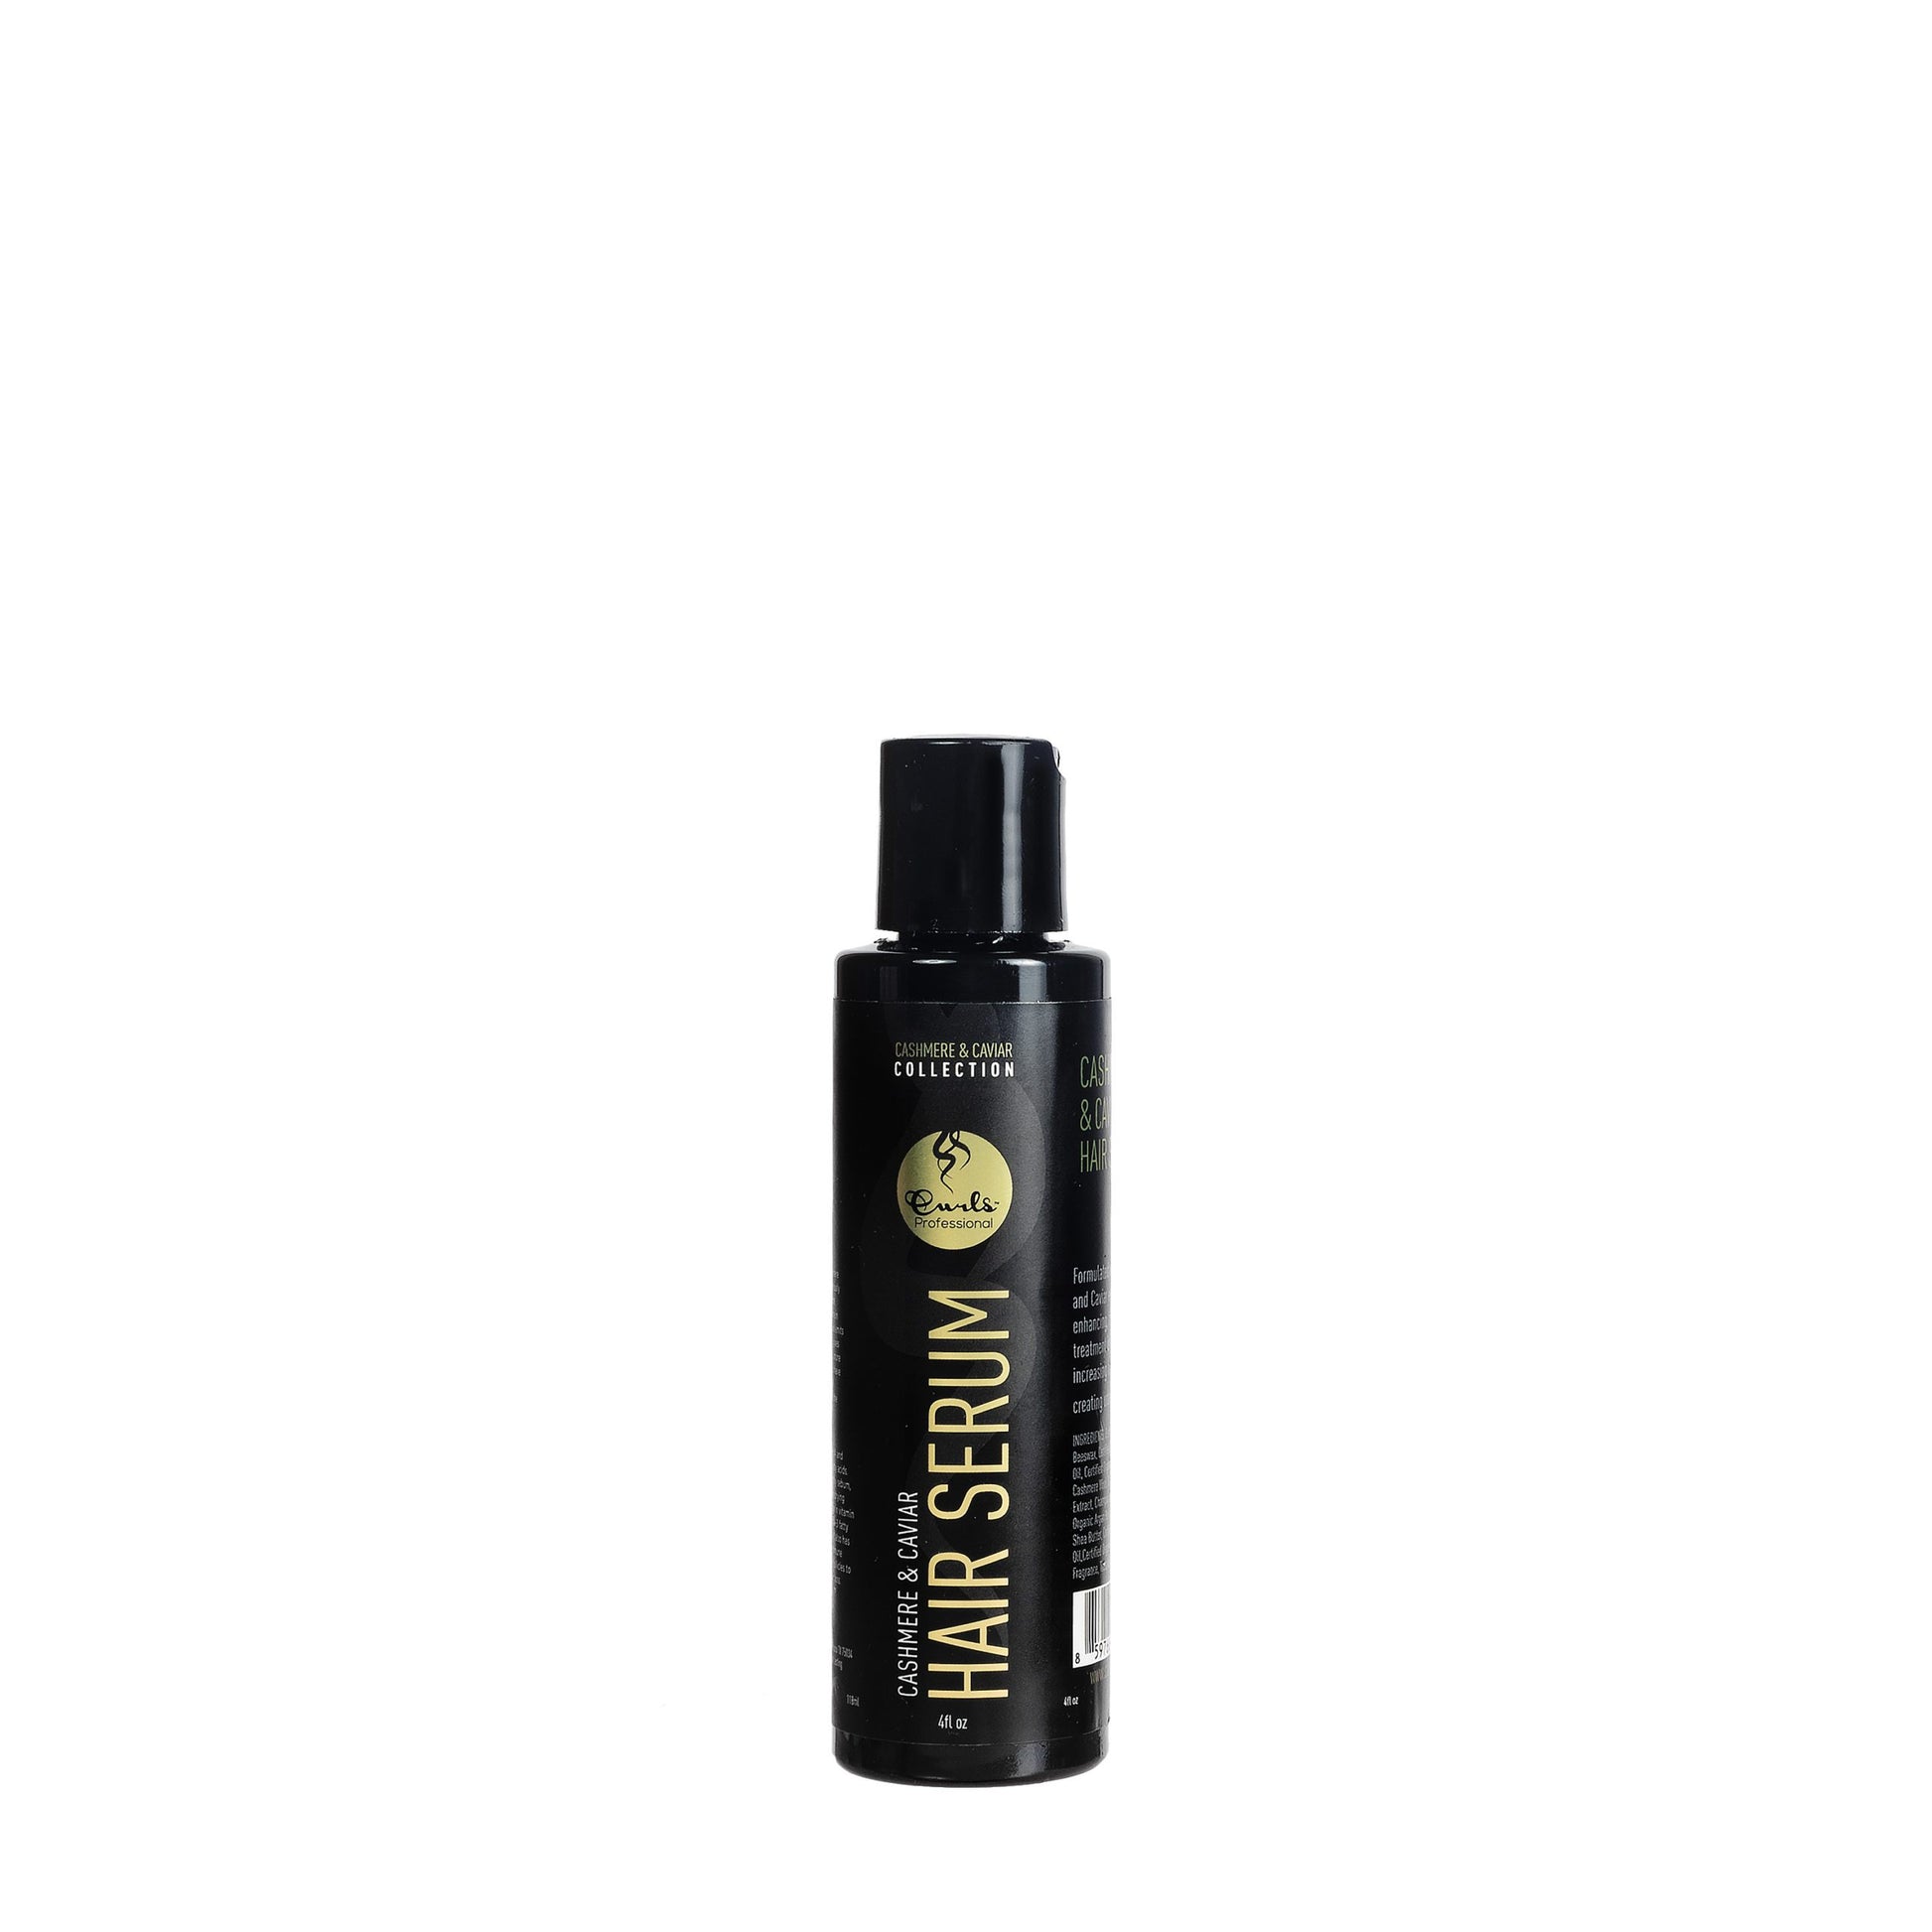 Cashmere + Caviar Hair Serum Beauty Supply store, all natural products for women, men, and kids. The wh shop is the sephora for black owned brands